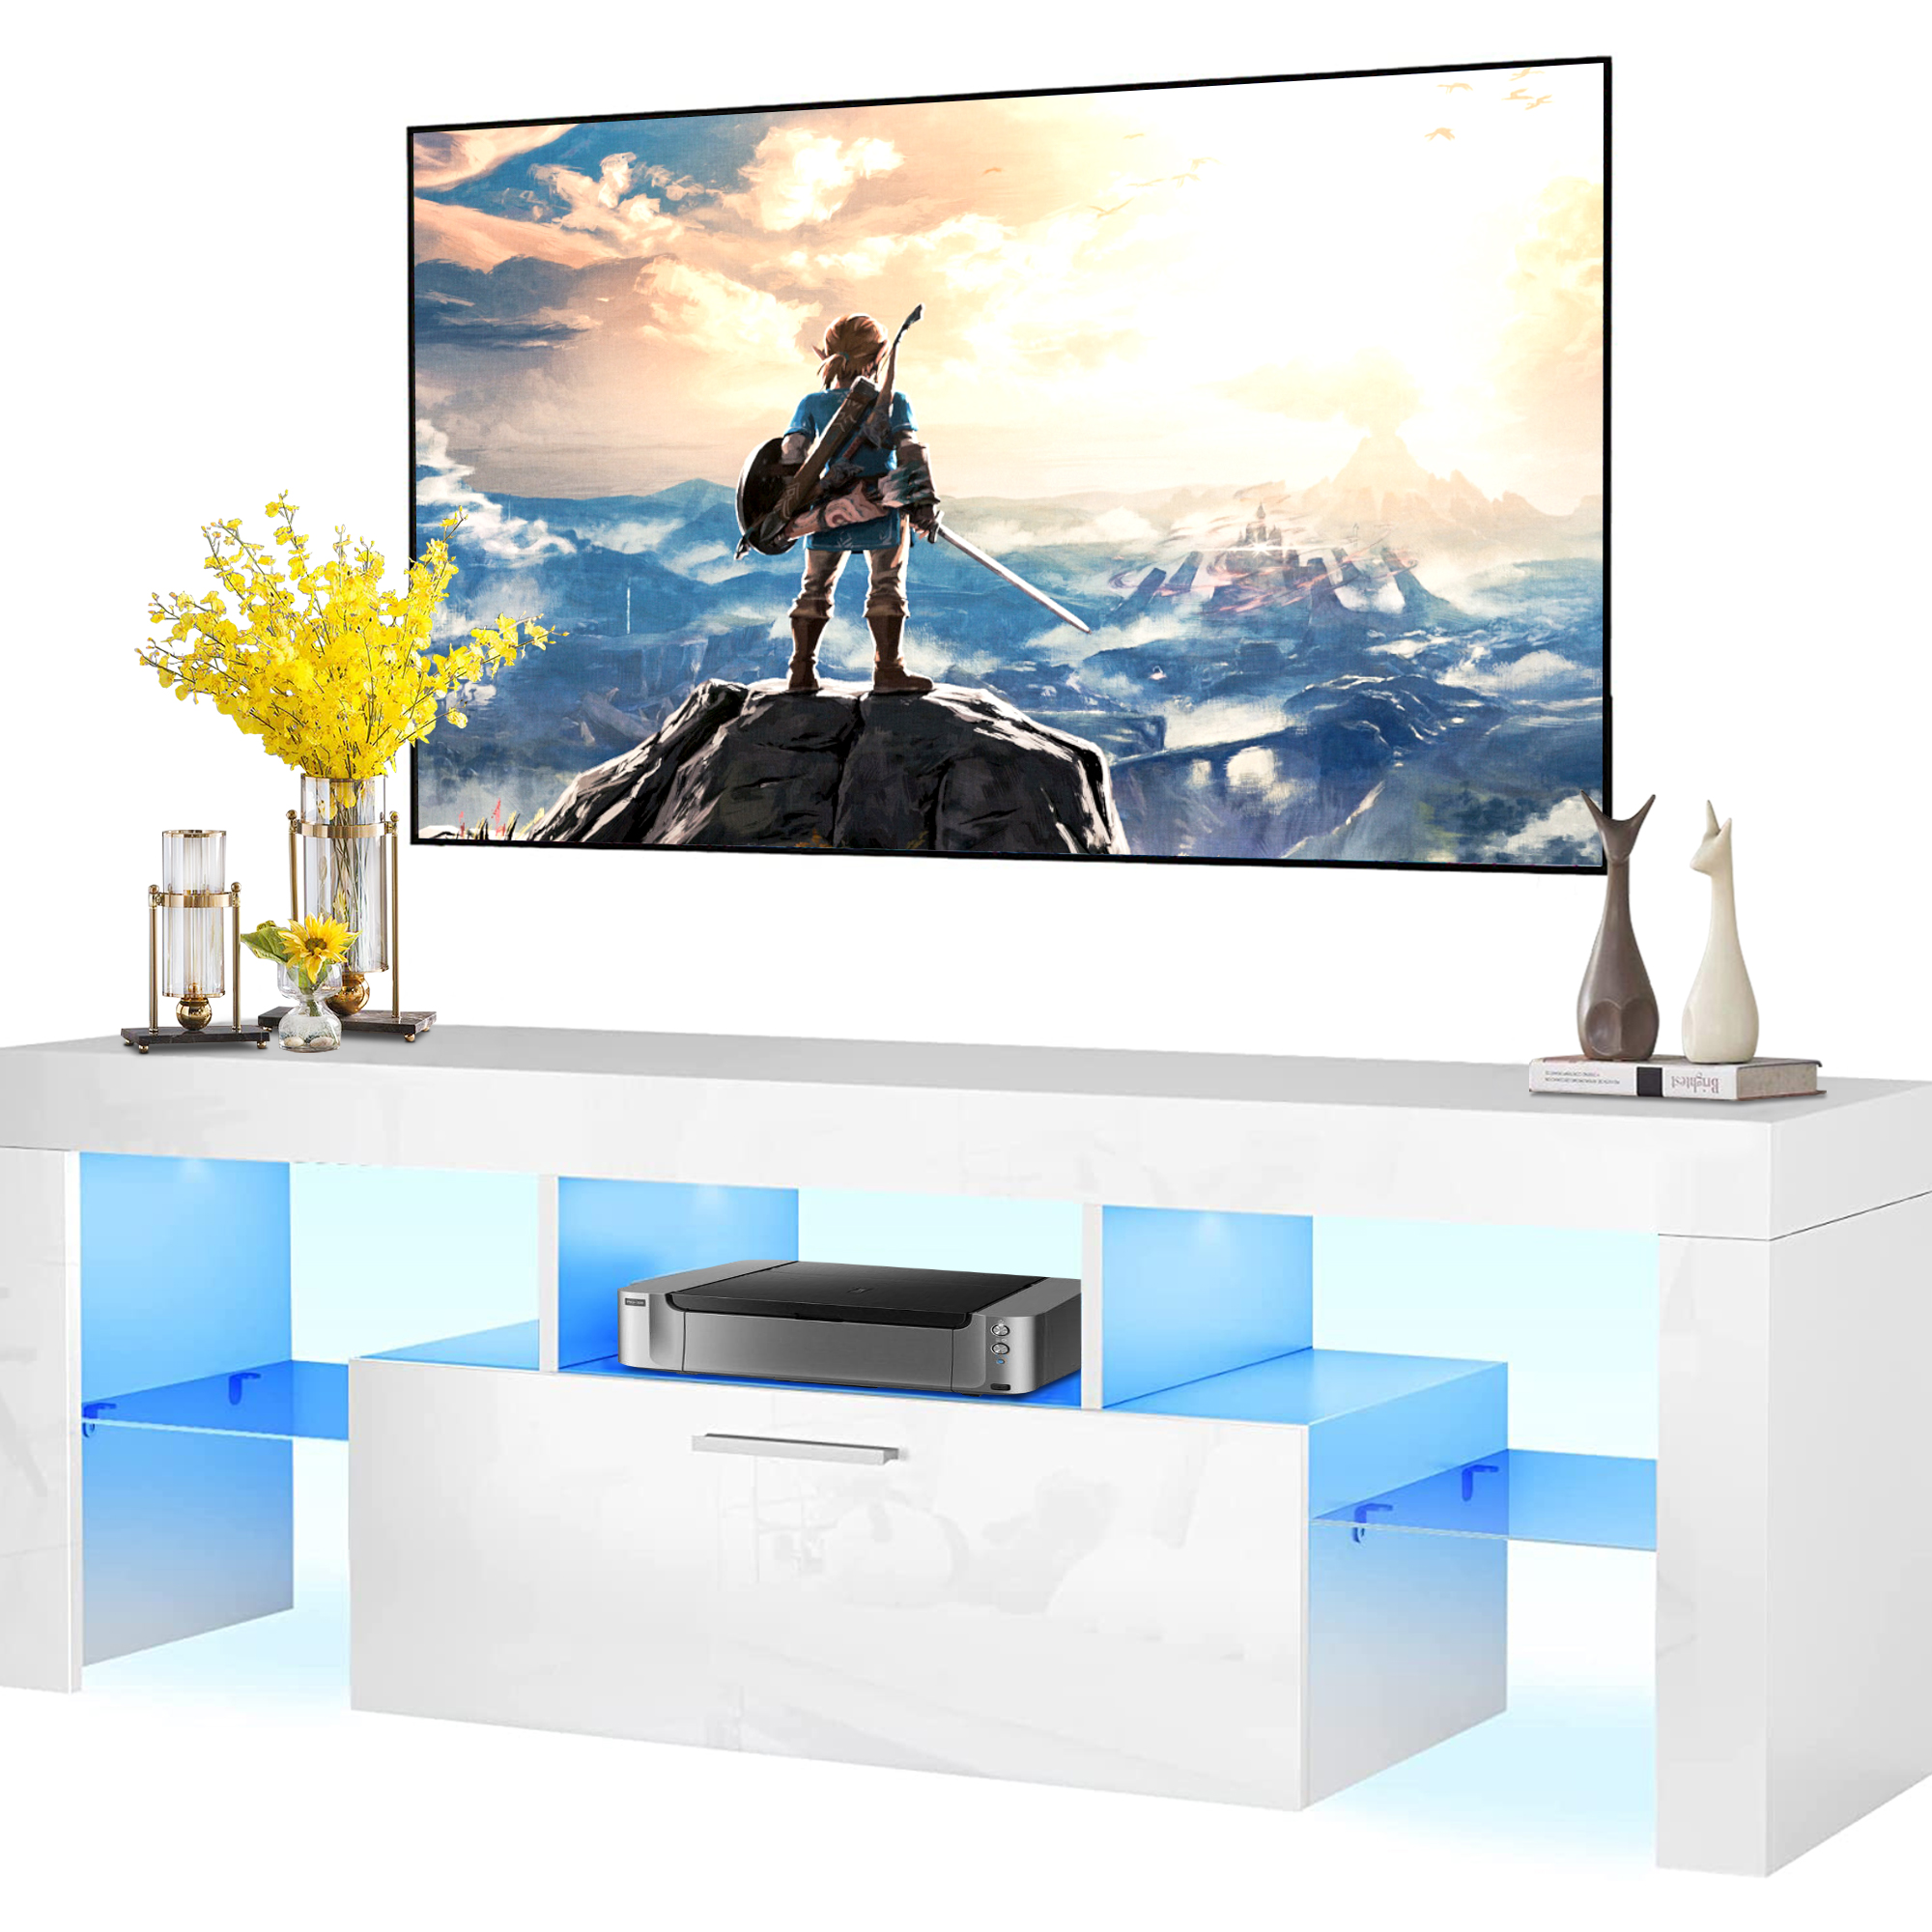 uhomepro TV Stand for TVs up to 55", Living Room Entertainment Center with RGB LED Lights and Storage Shelves Furniture, White High Gloss TV Cabinet Console Table - image 1 of 11